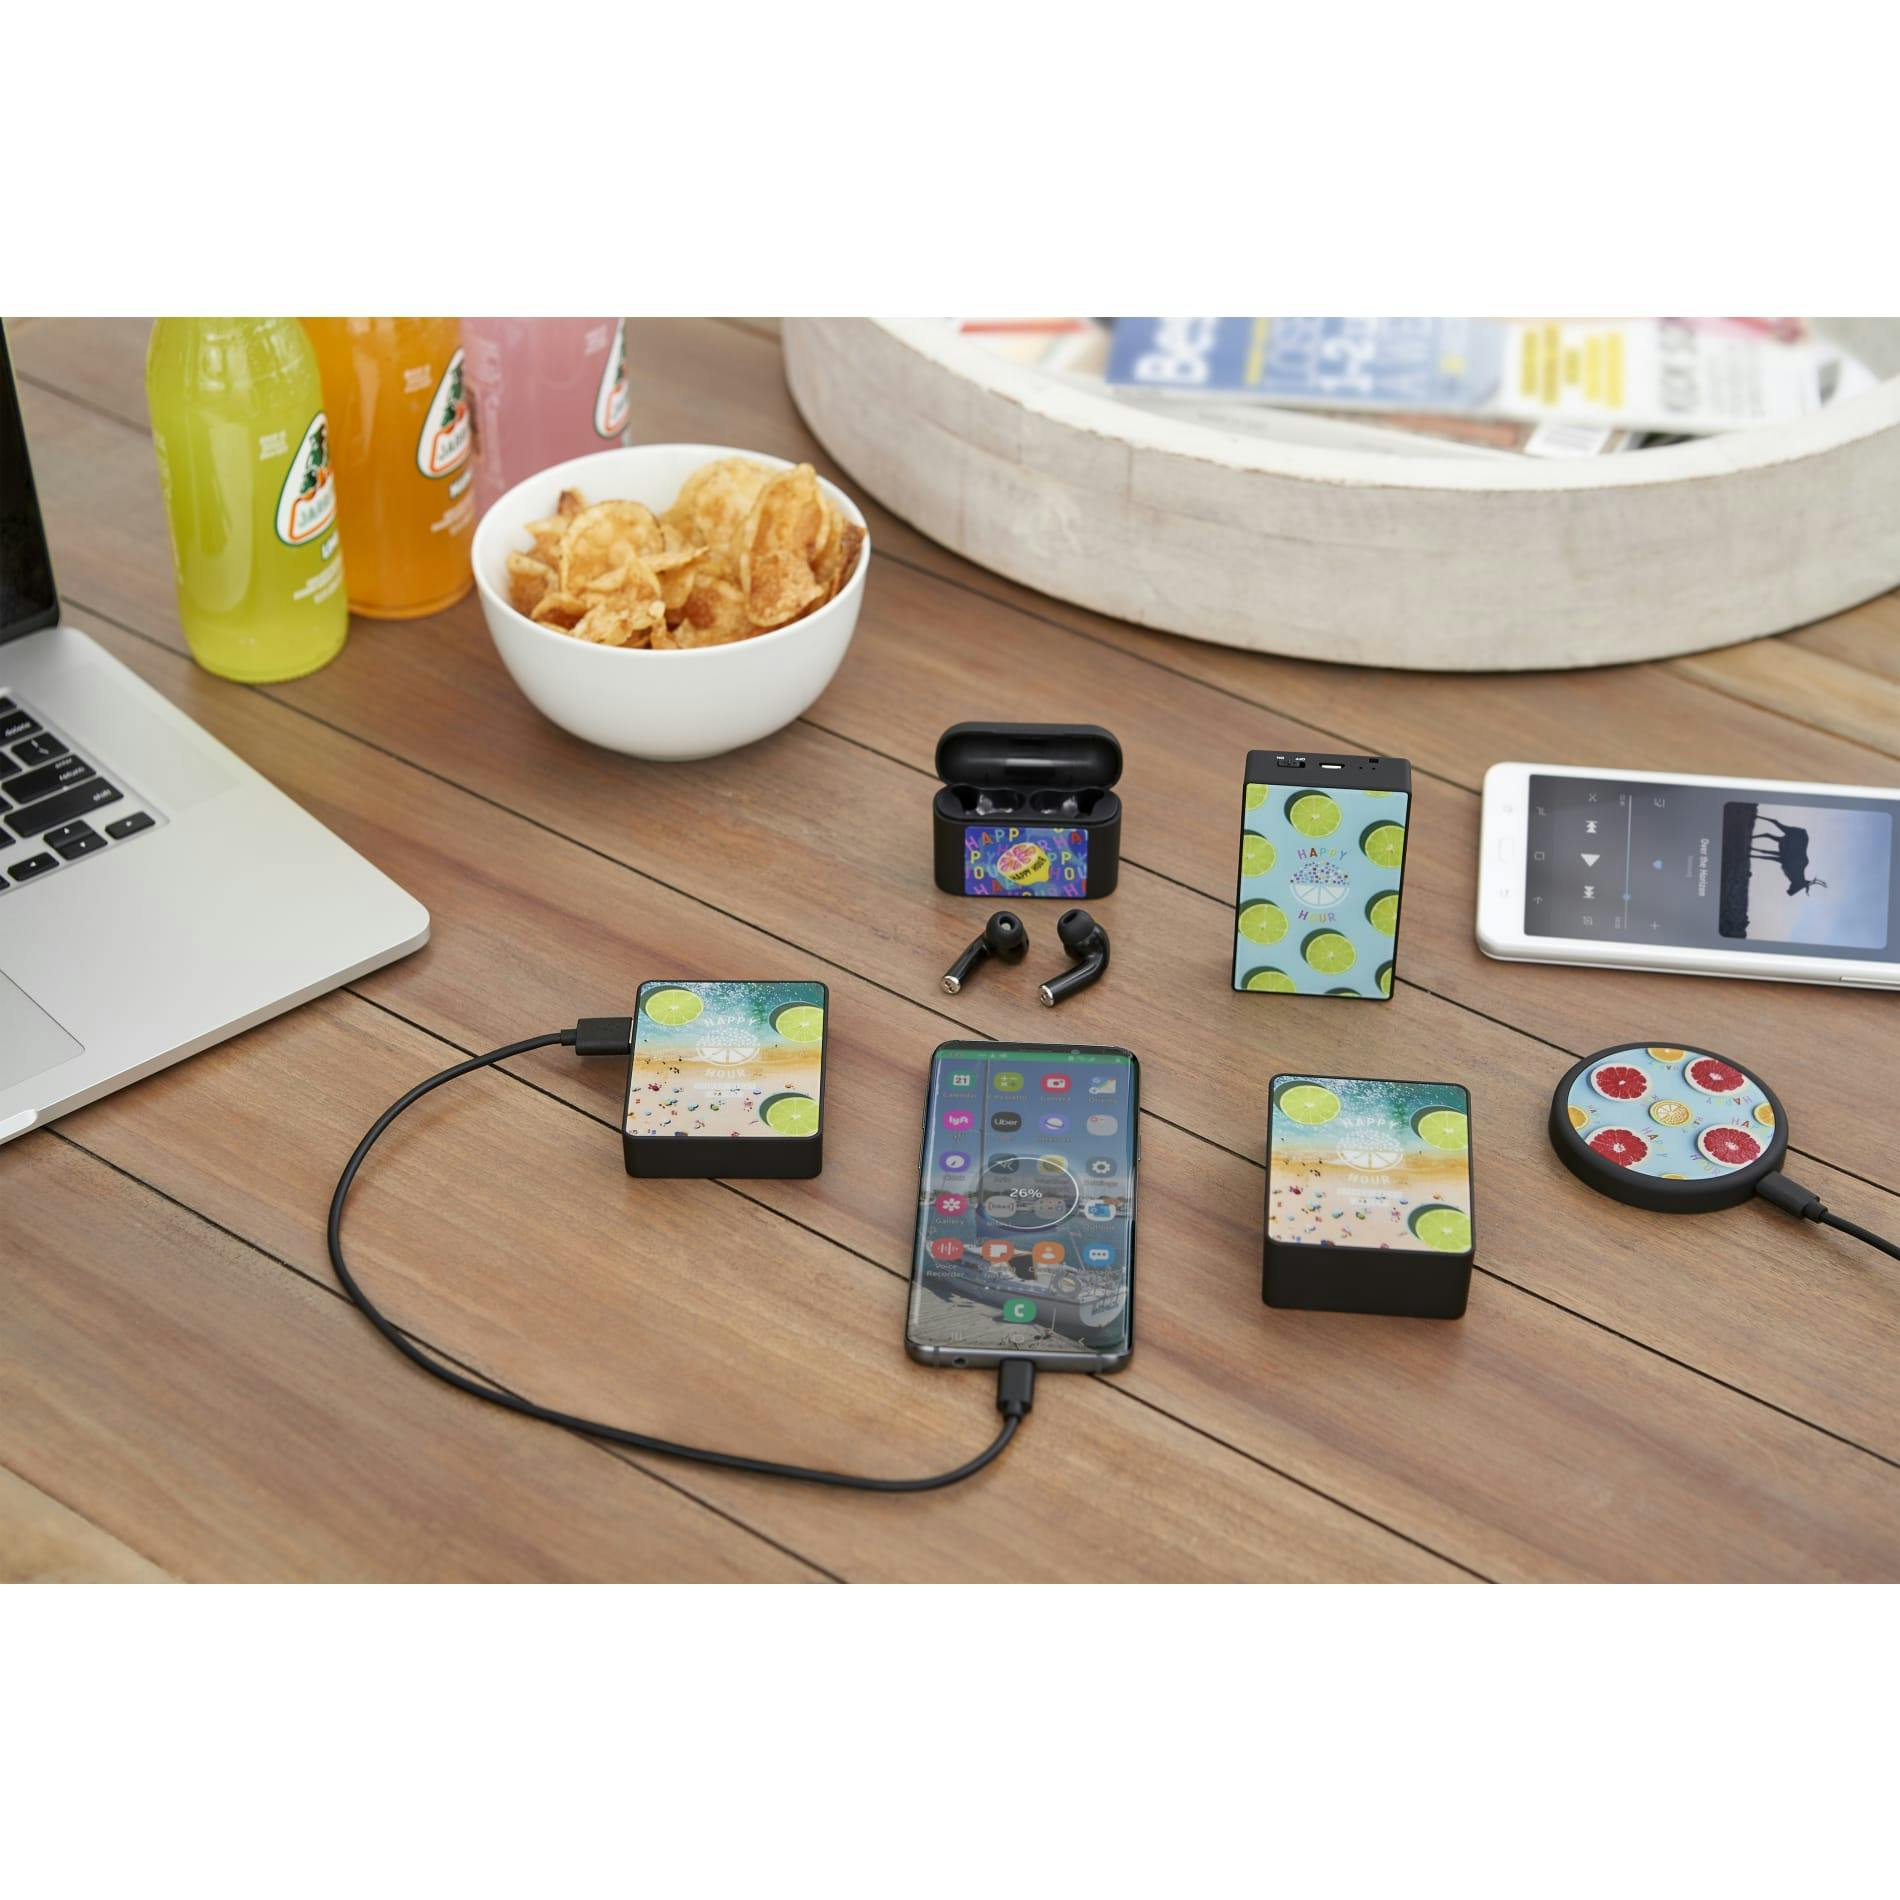 The Looking Glass Wireless Charging Pad - additional Image 6